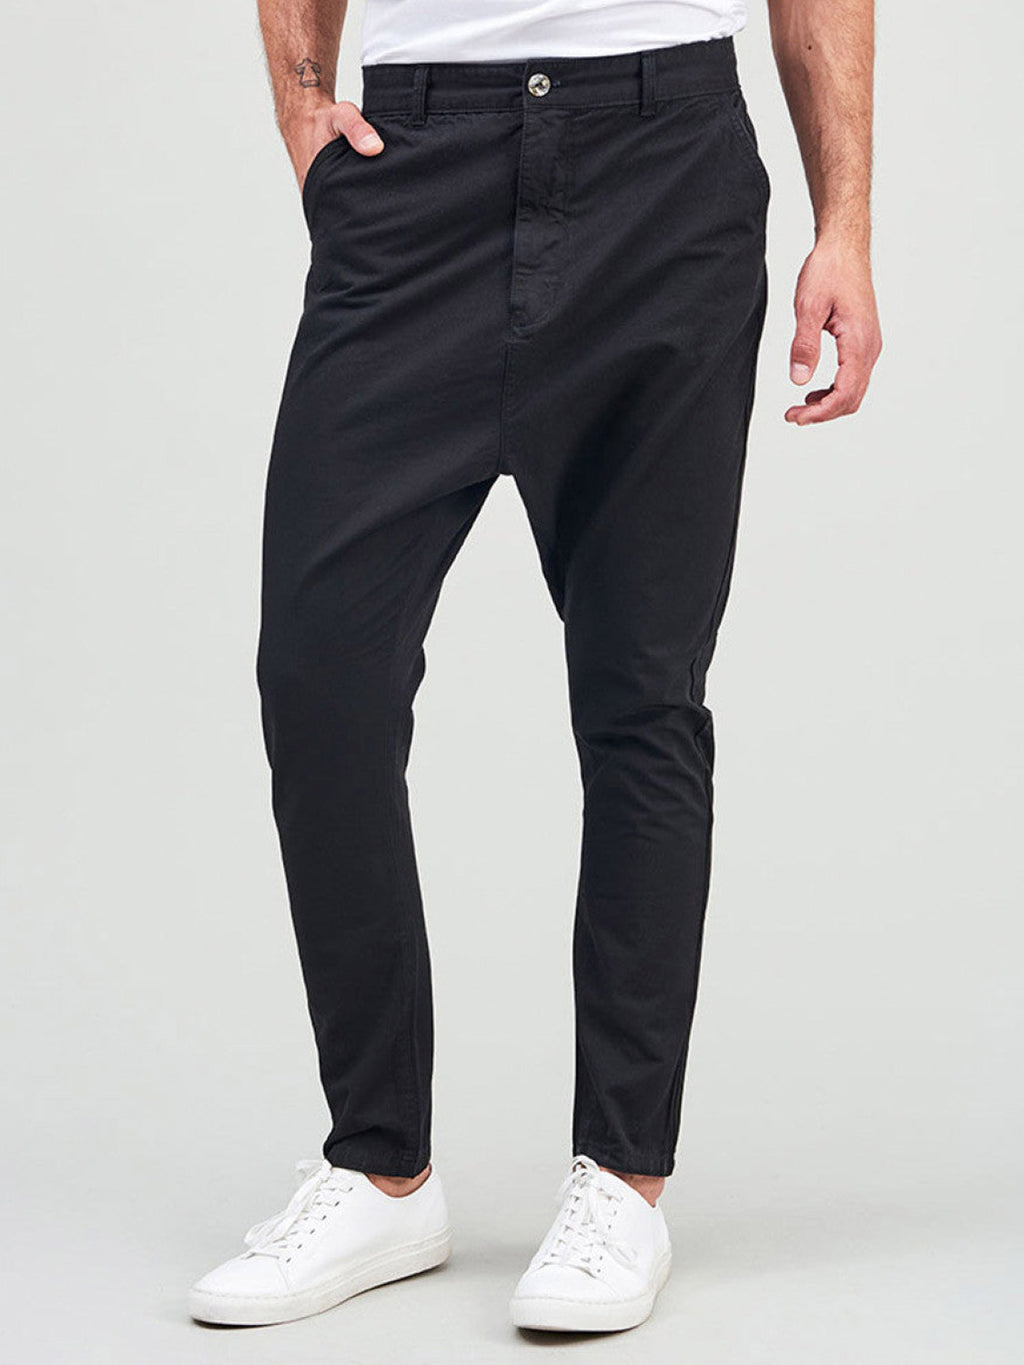 Pants and Sweatpants | Menswear | The Project Garments